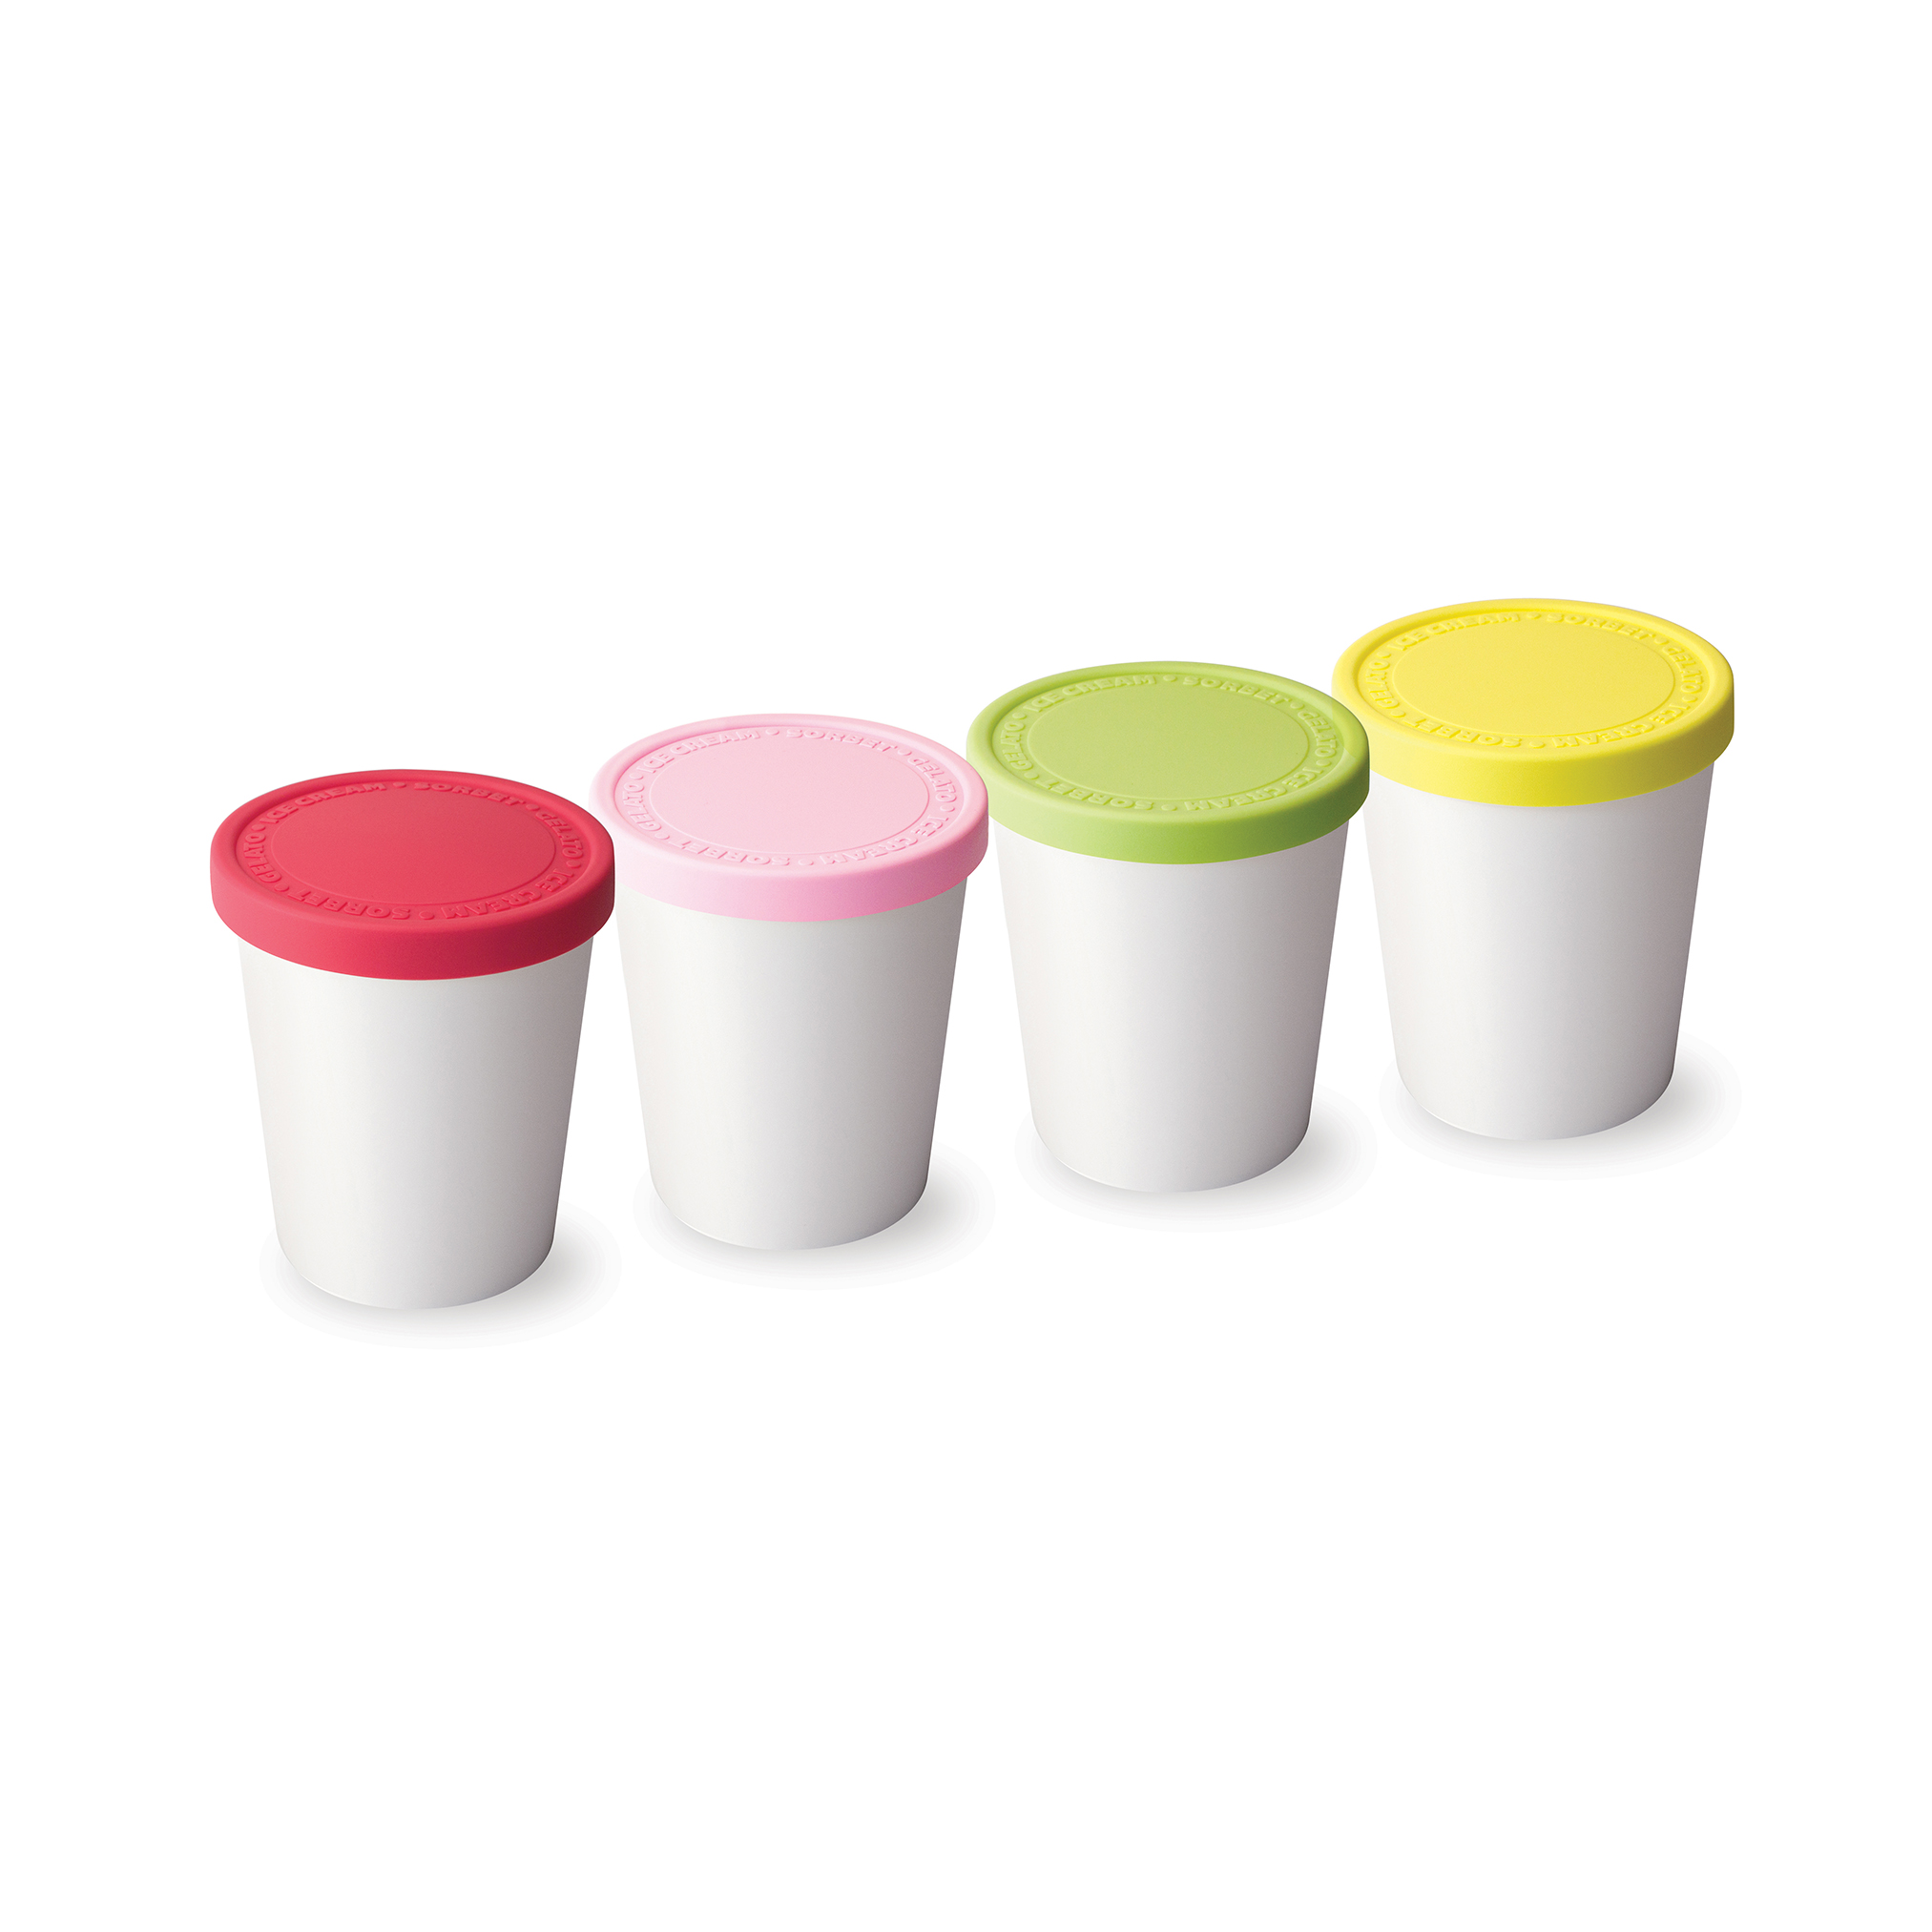 Tovolo Mini Sweet Treats Ice Cream Tubs, Reusable Container Stackable on Freezer Shelves, BPA-Free, Set of 4, Assorted Colors - image 4 of 5